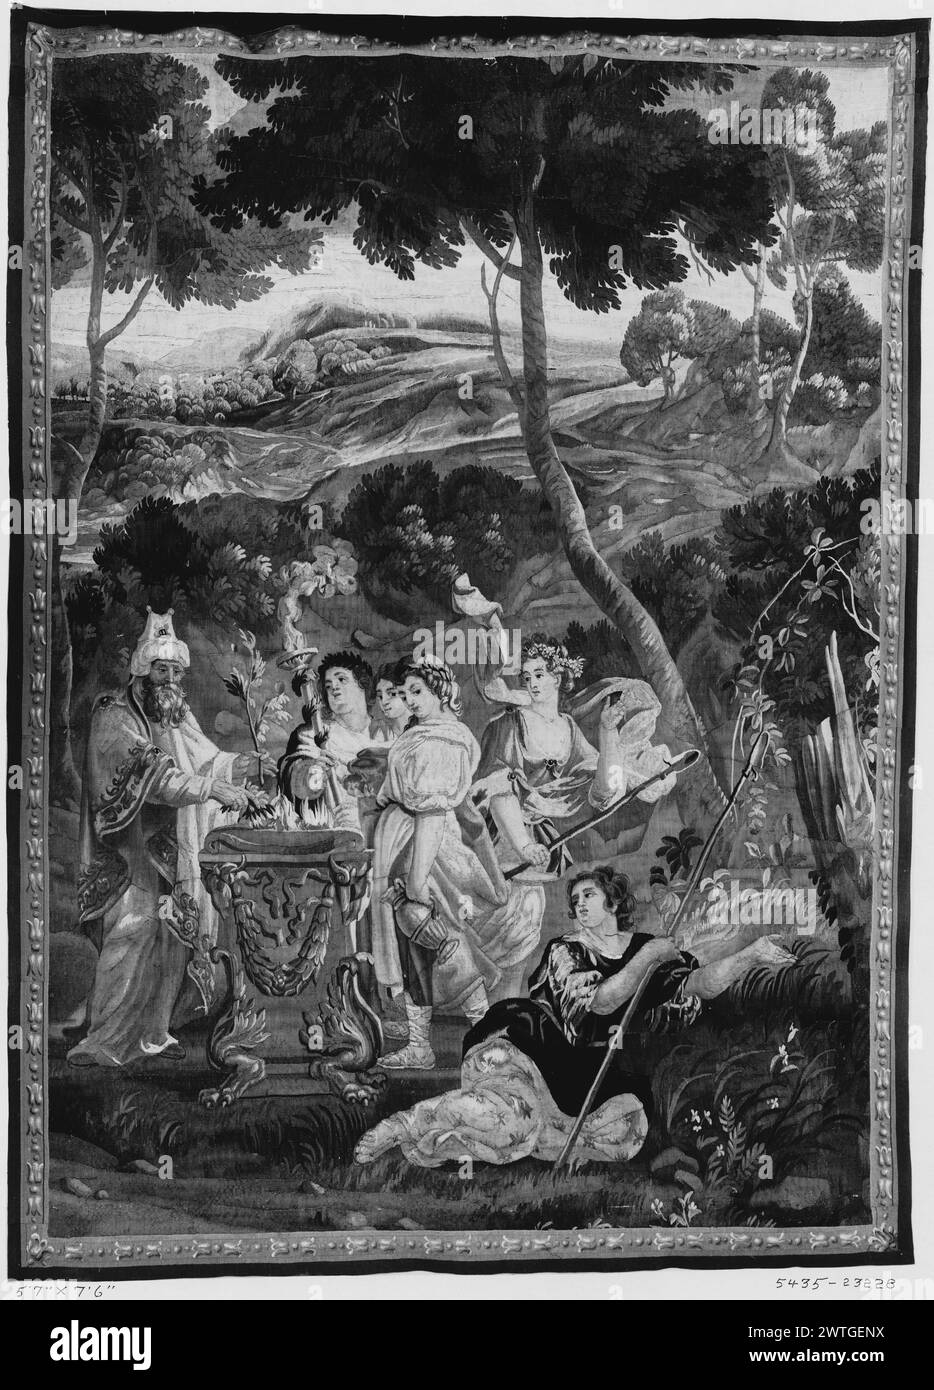 scene. unknown c. 1710 Tapestry Dimensions: H 7'6' x W 5'7' Tapestry Materials/Techniques: unknown Culture: Flemish Weaving Center: Brussels Ownership History: French & Co. purchased from Harder Julius 2/9/1921; sold to W. O. Chrysler 6/30/1921. In landscape, high priest making offering at altar surrounded by several female figures wearing laurel wreaths; reclining shepherdess nearby (BRD) picture-frame border with abstracted acanthus-leaf motif with foliage moldings in each corner French & Co. stock sheet in archive, 23228 Related Works: Compositionally similar tapestries (full composition), Stock Photo